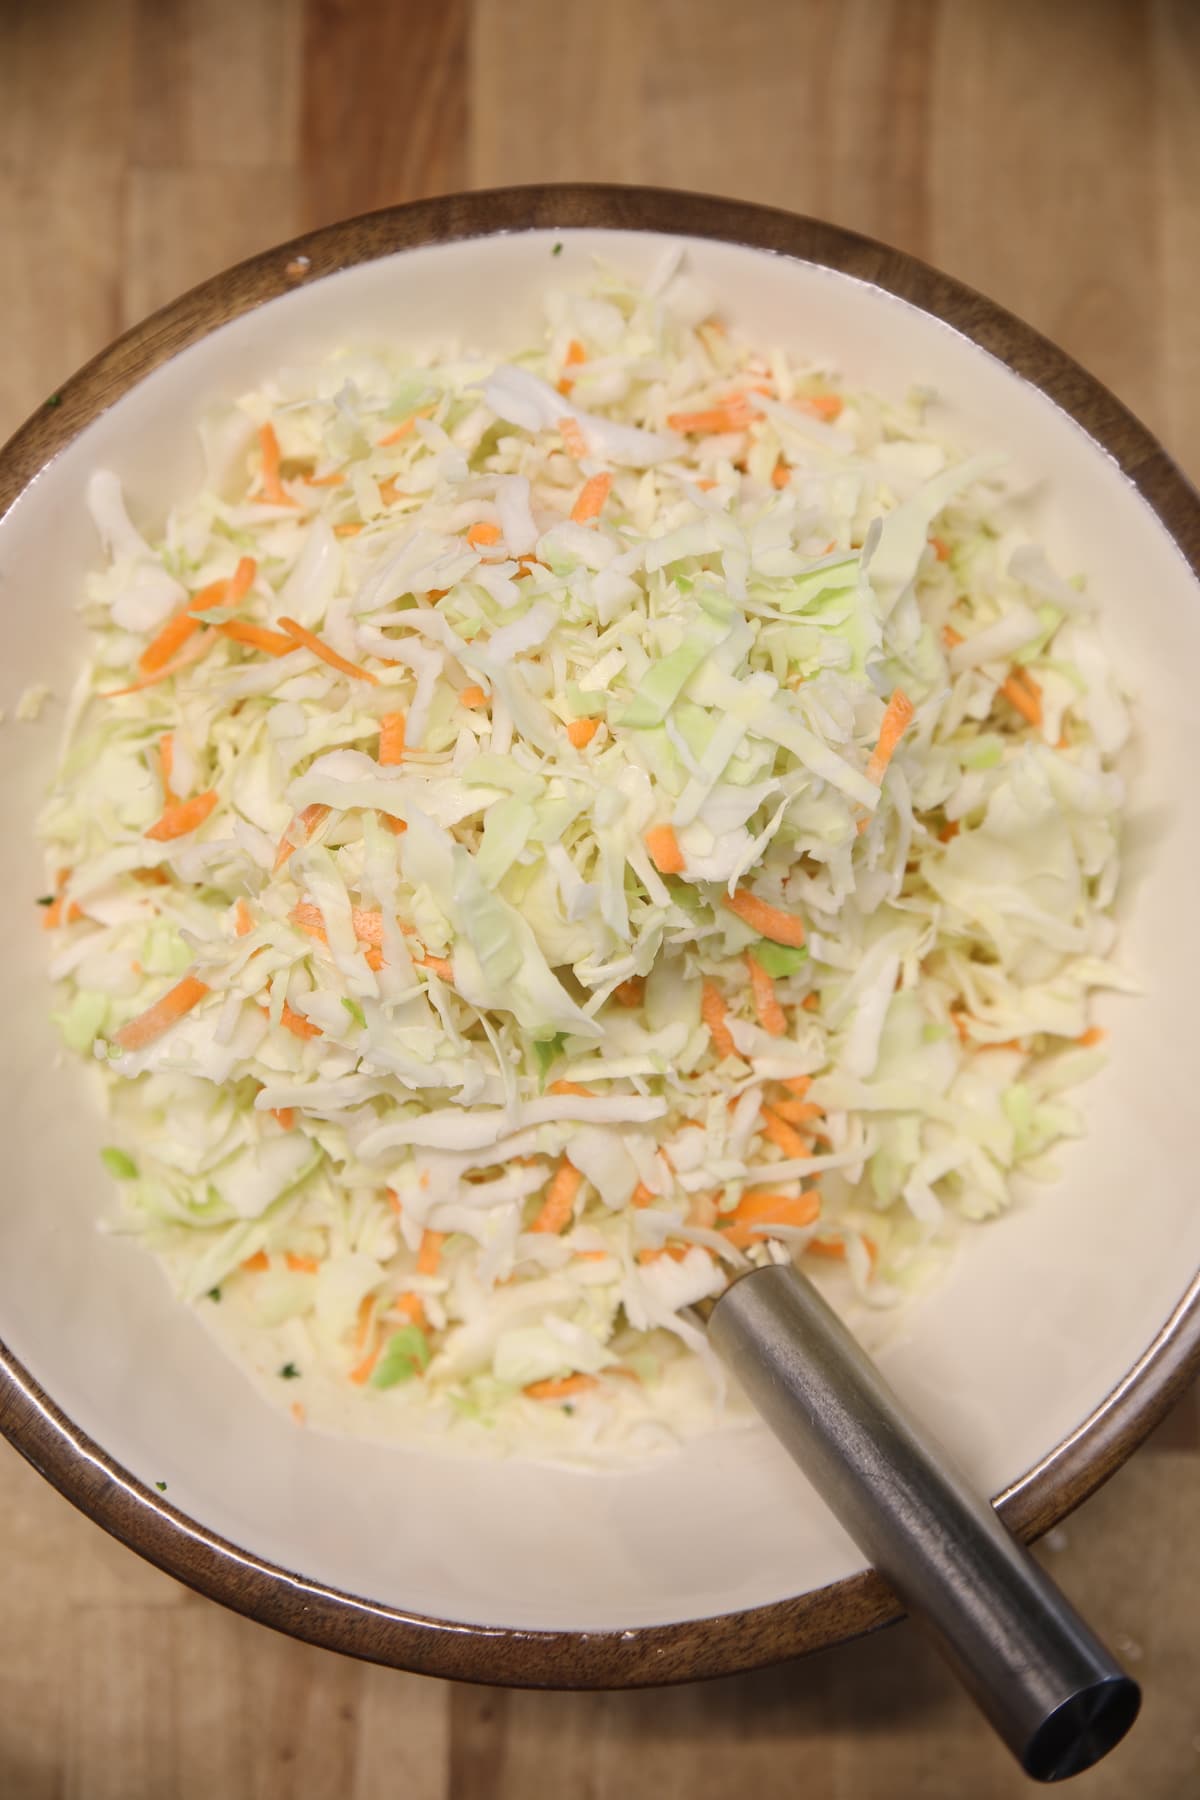 Bowl of shredded cabbage and carrots with a whisk.